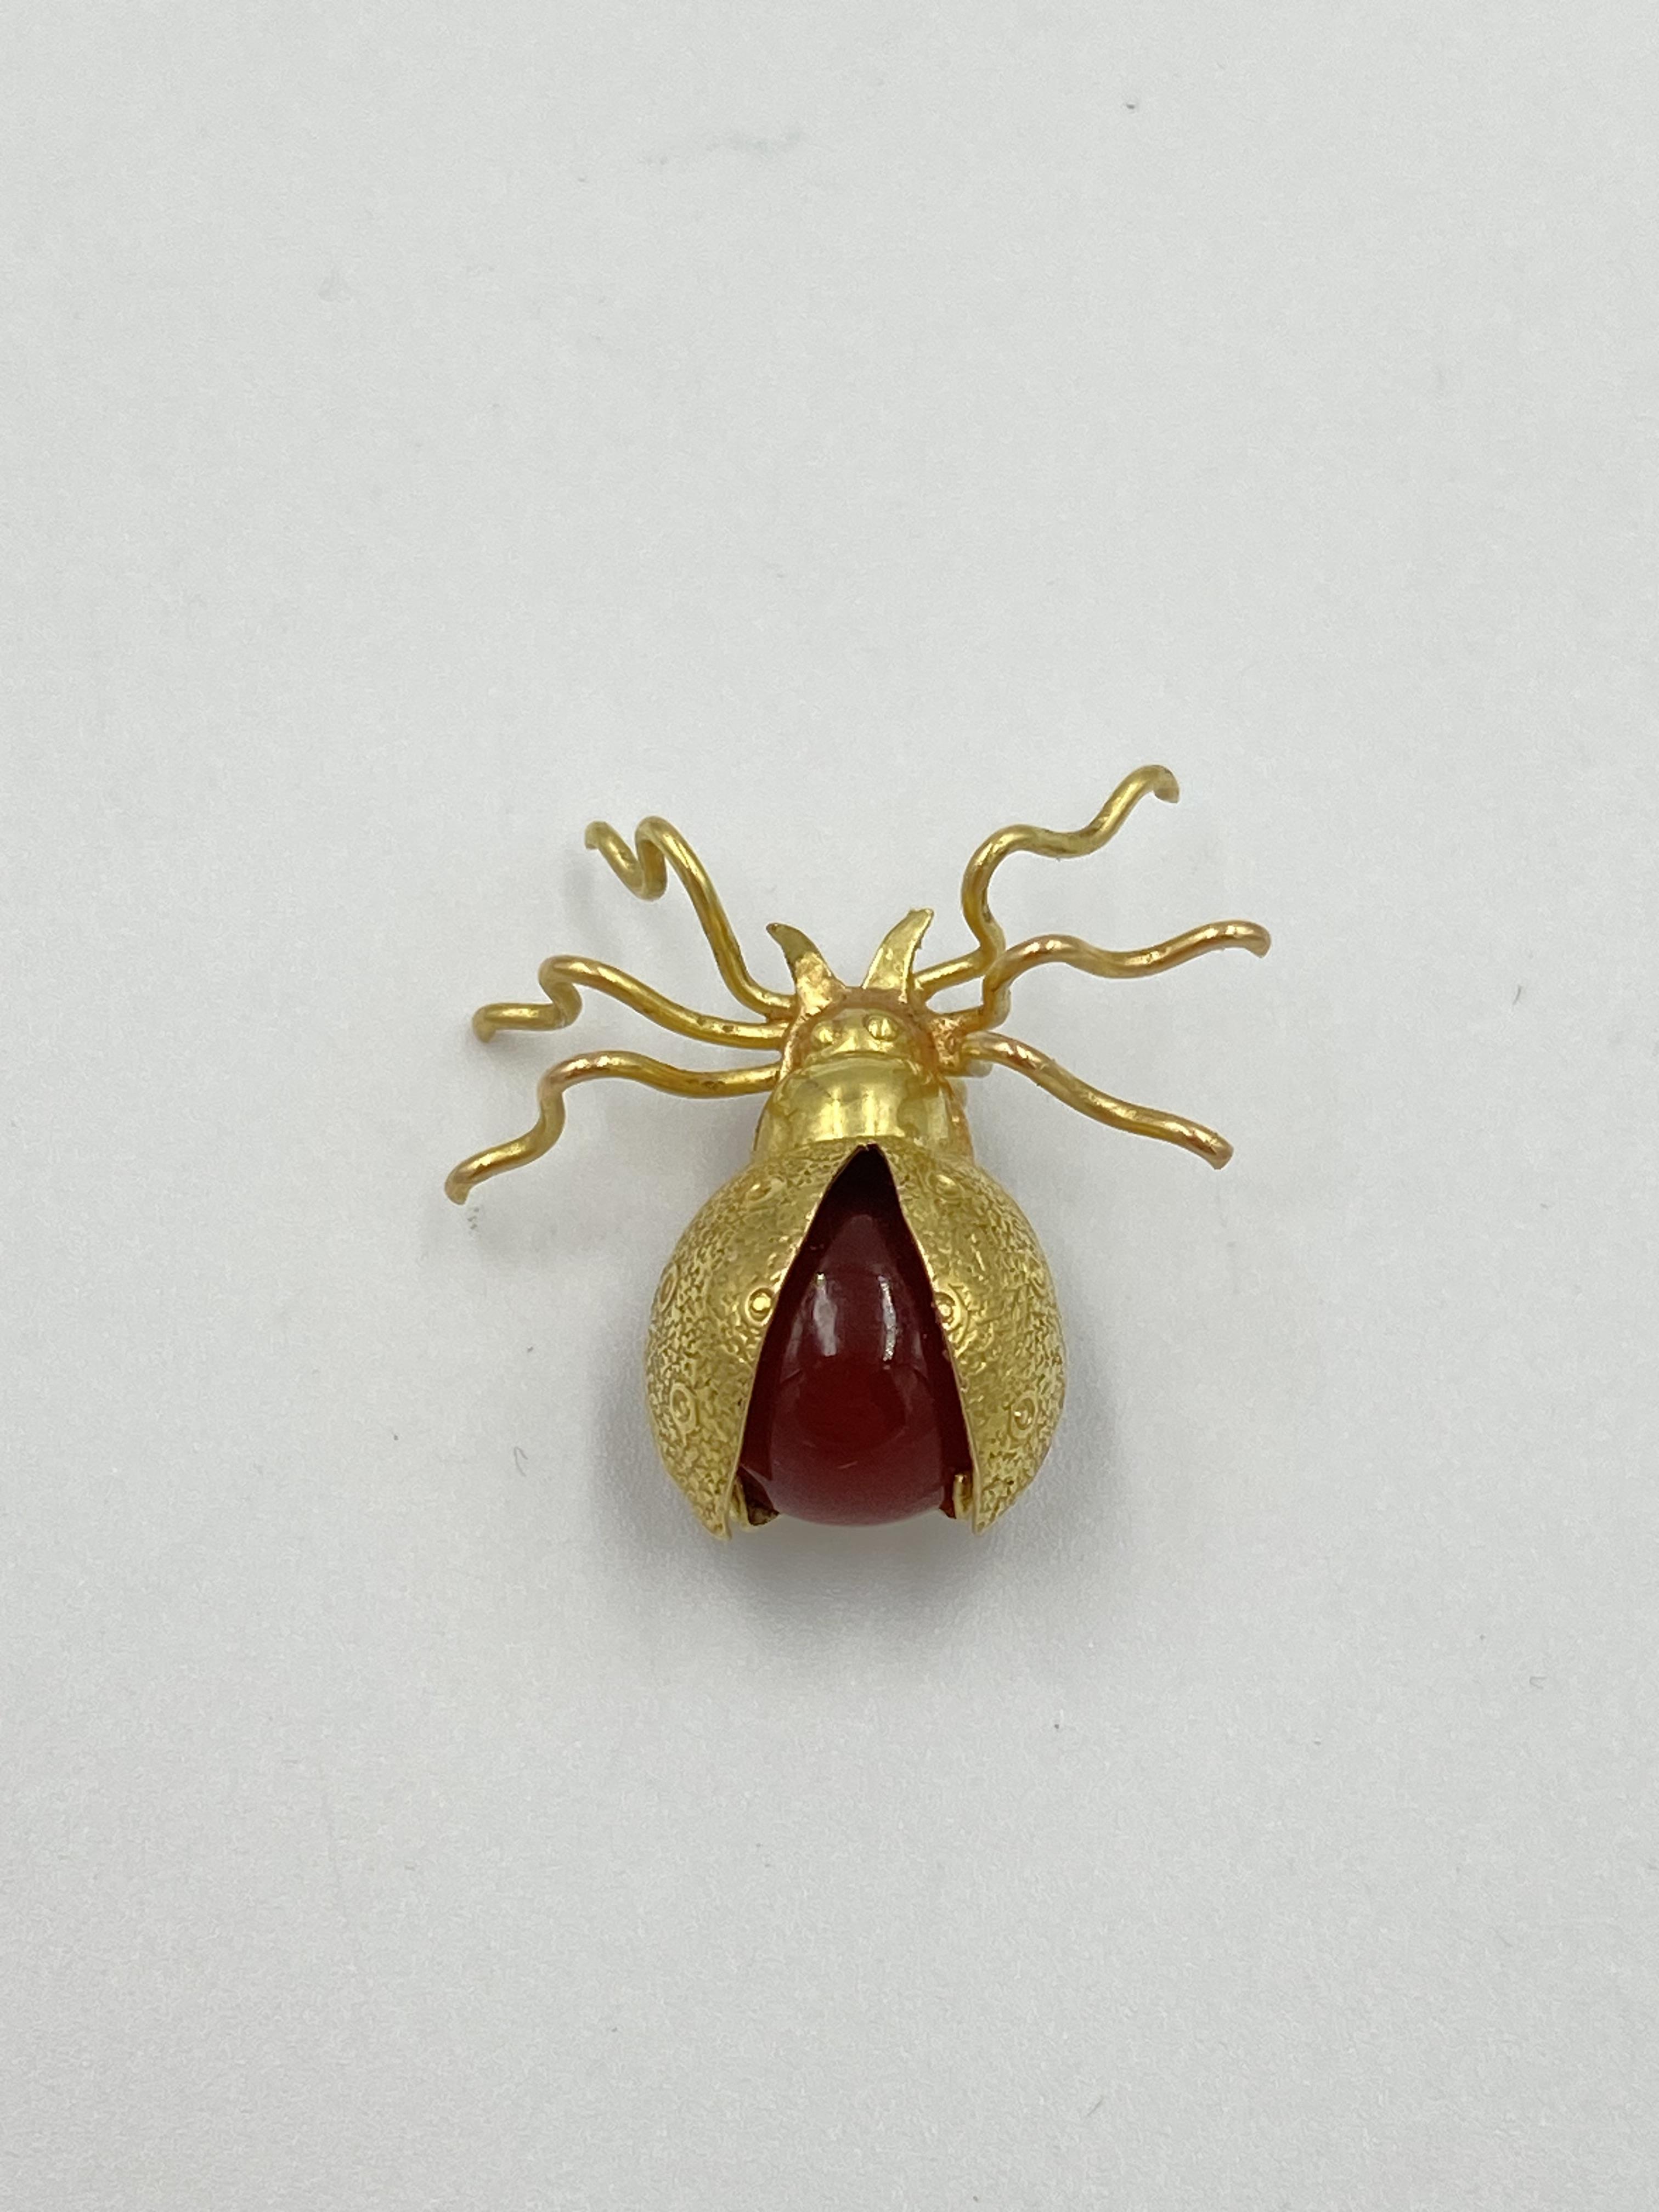 18ct gold spider brooch set with a carnelian cabochon - Image 2 of 4